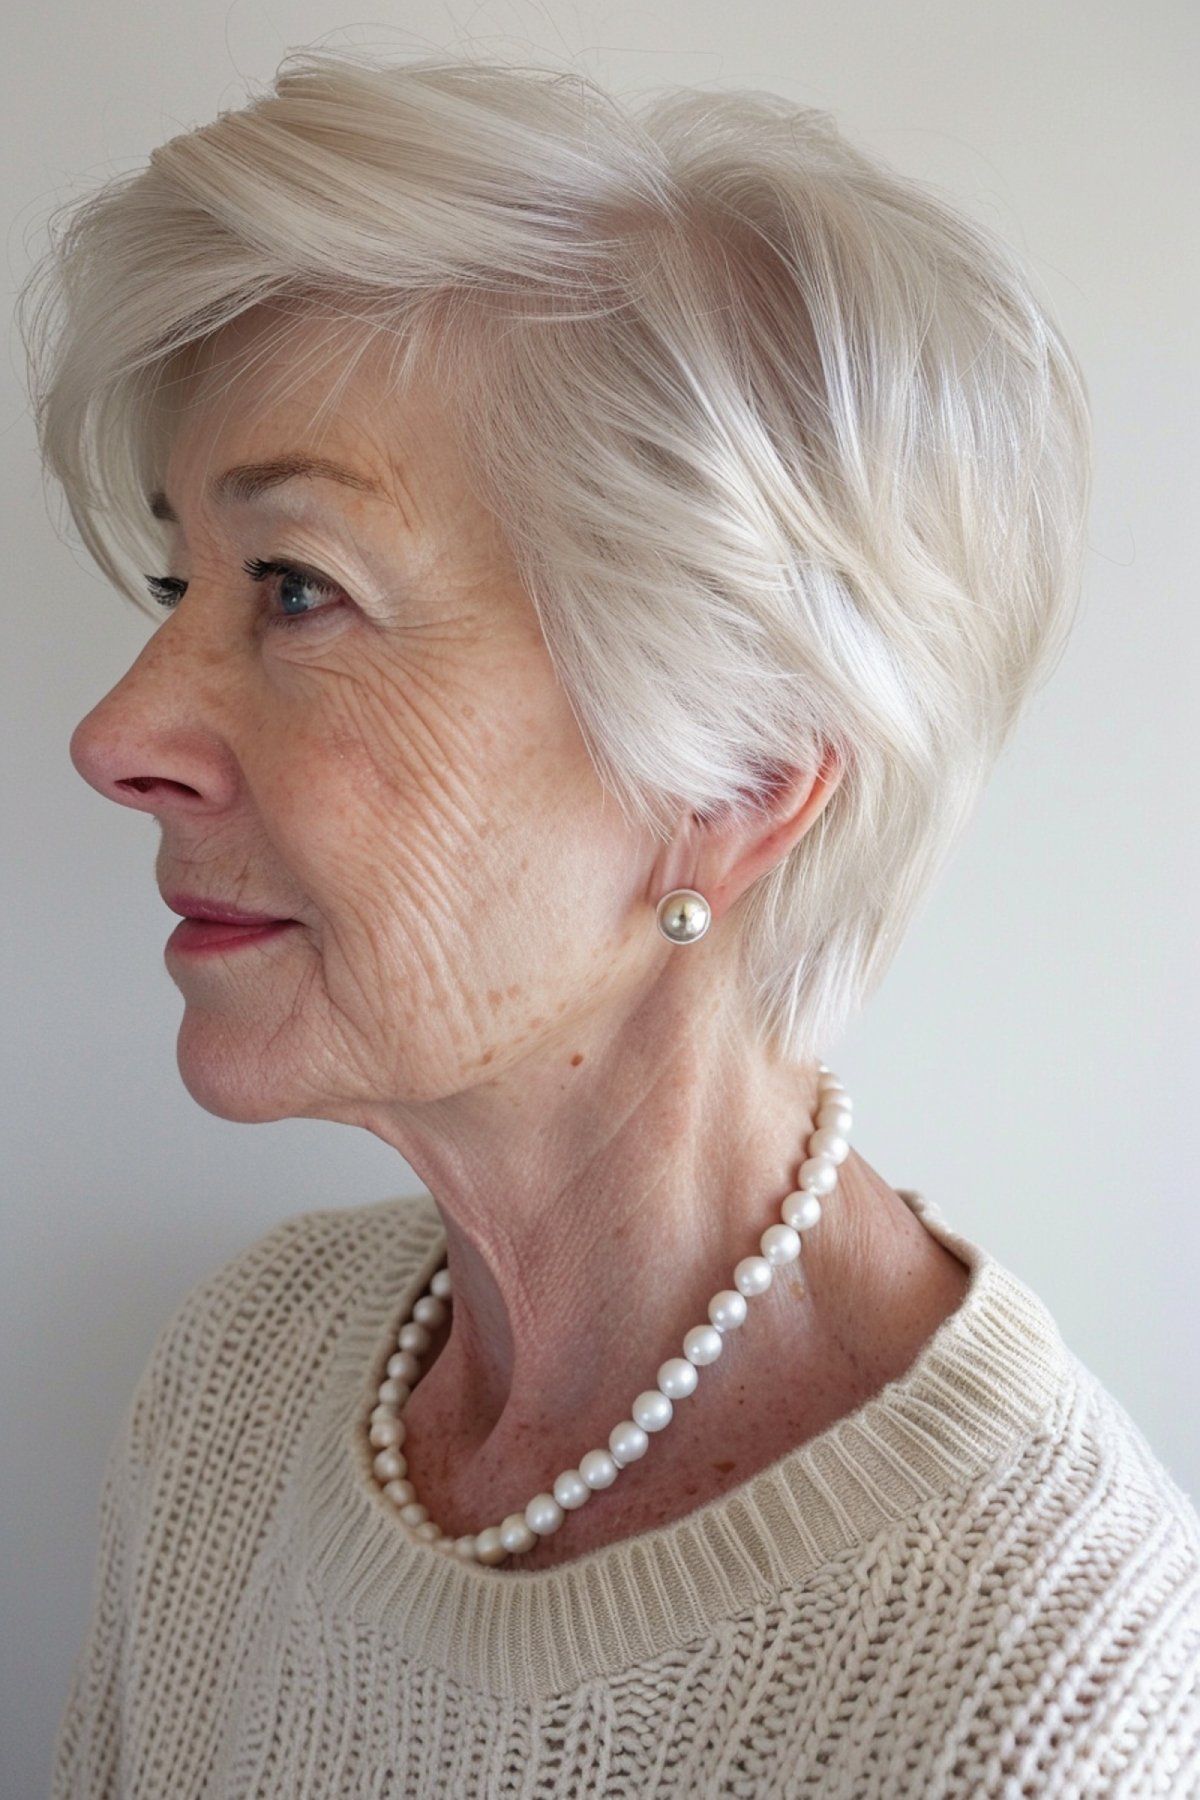 Senior woman with sleek silver stacked pixie cut